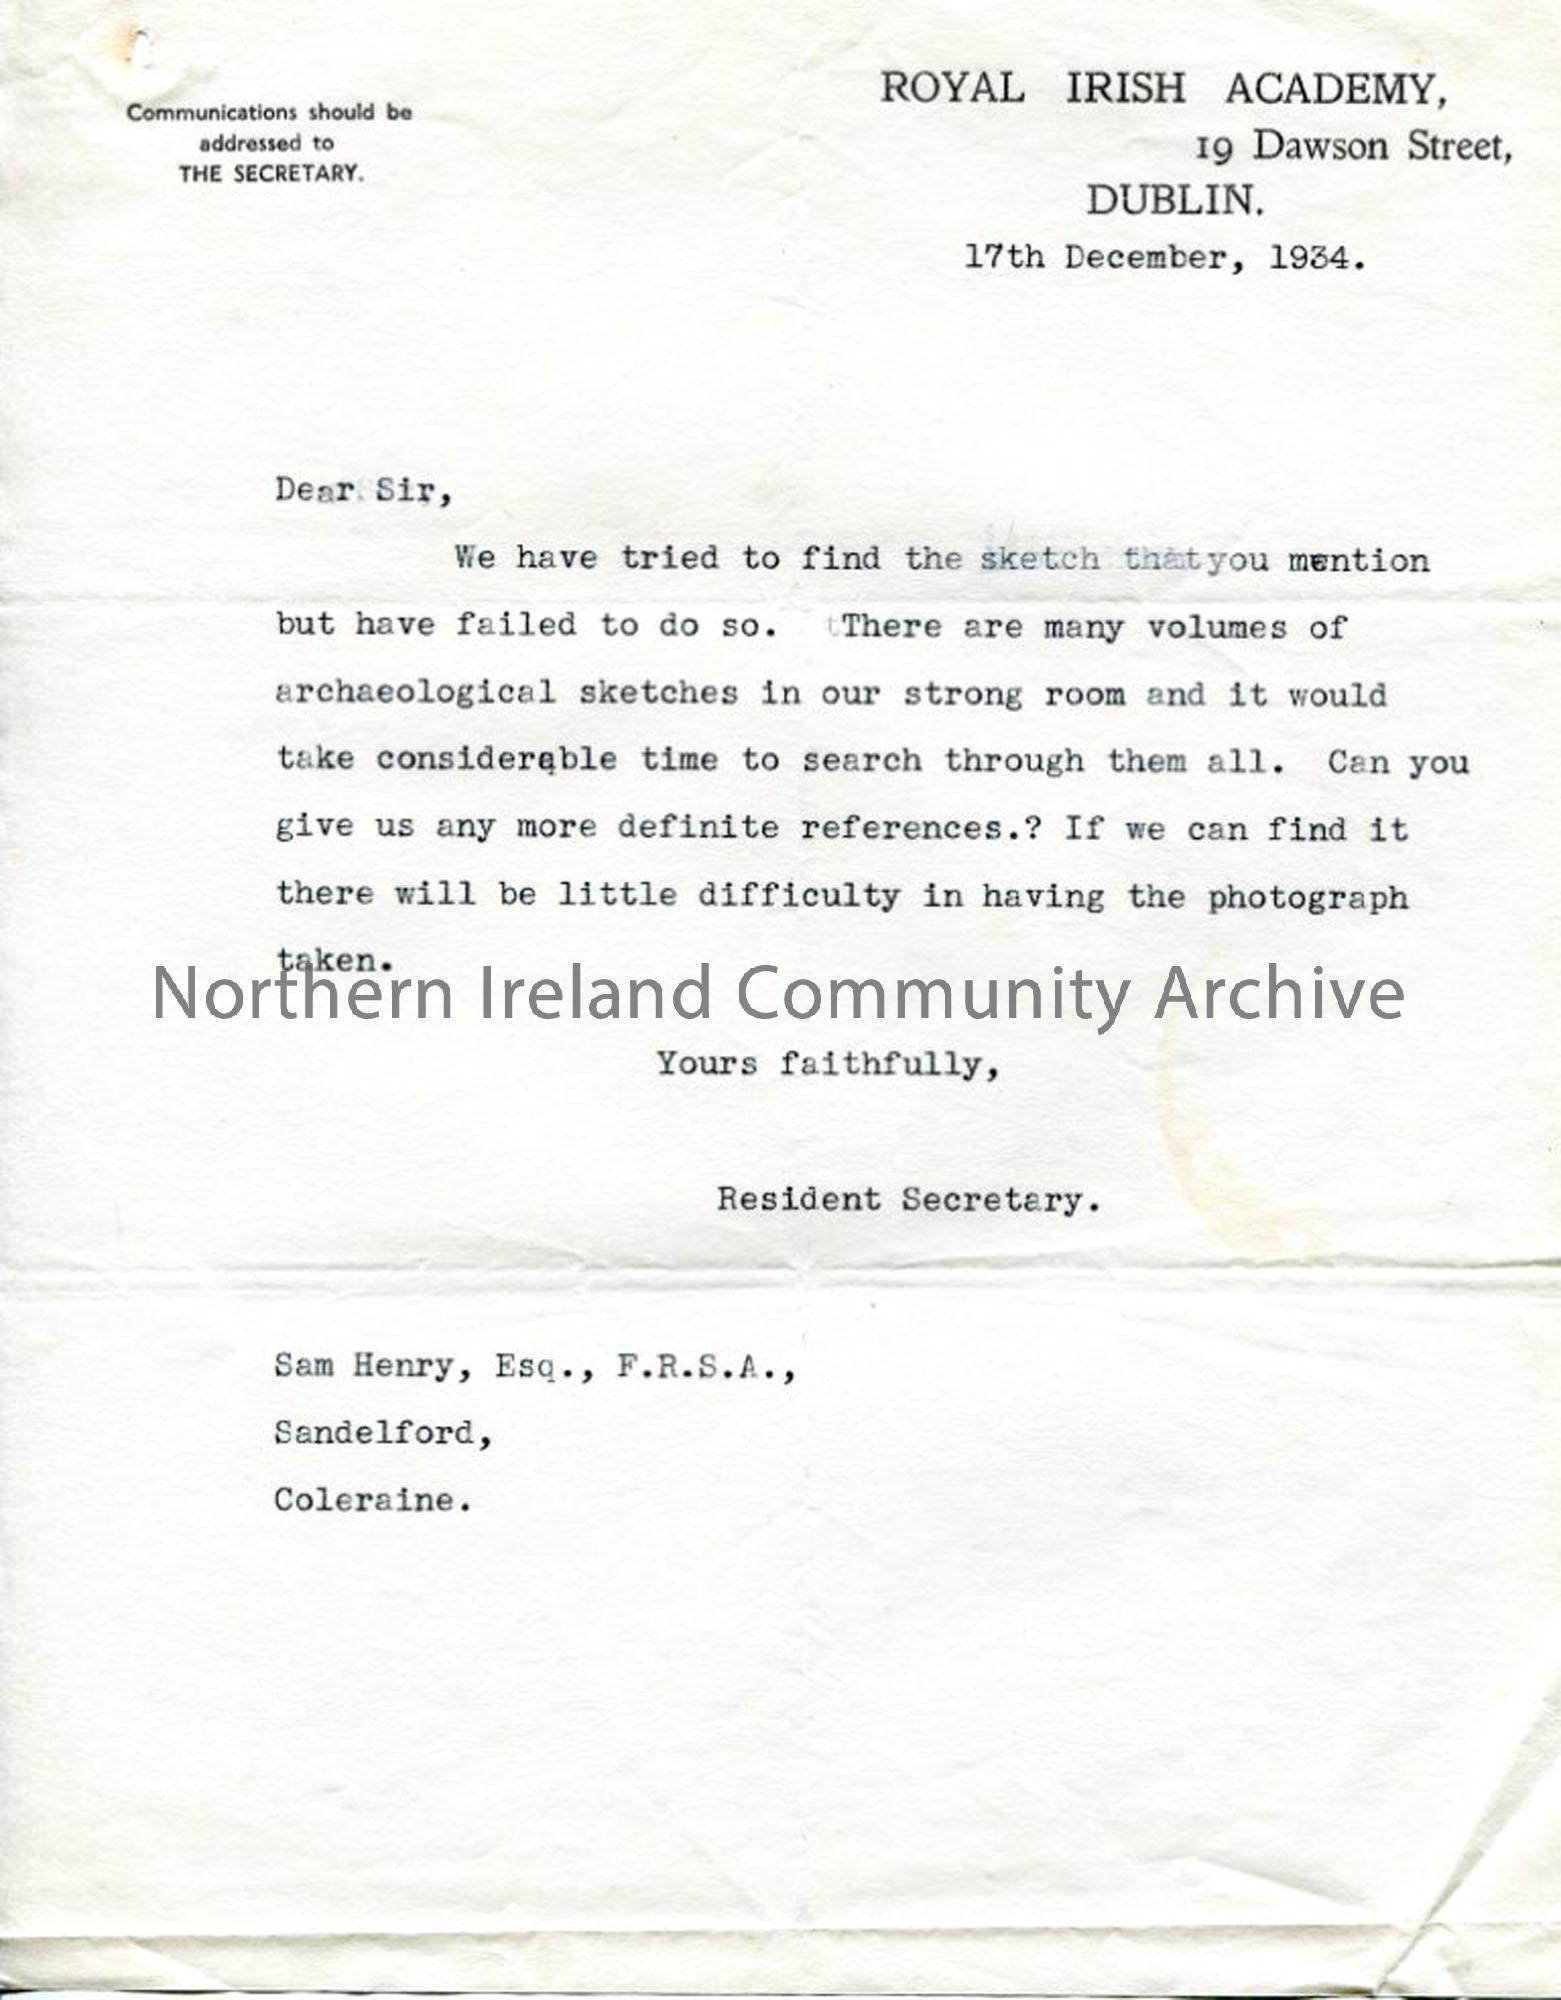 Letter on Royal Irish Academy headed paper, dated 17.12.1934